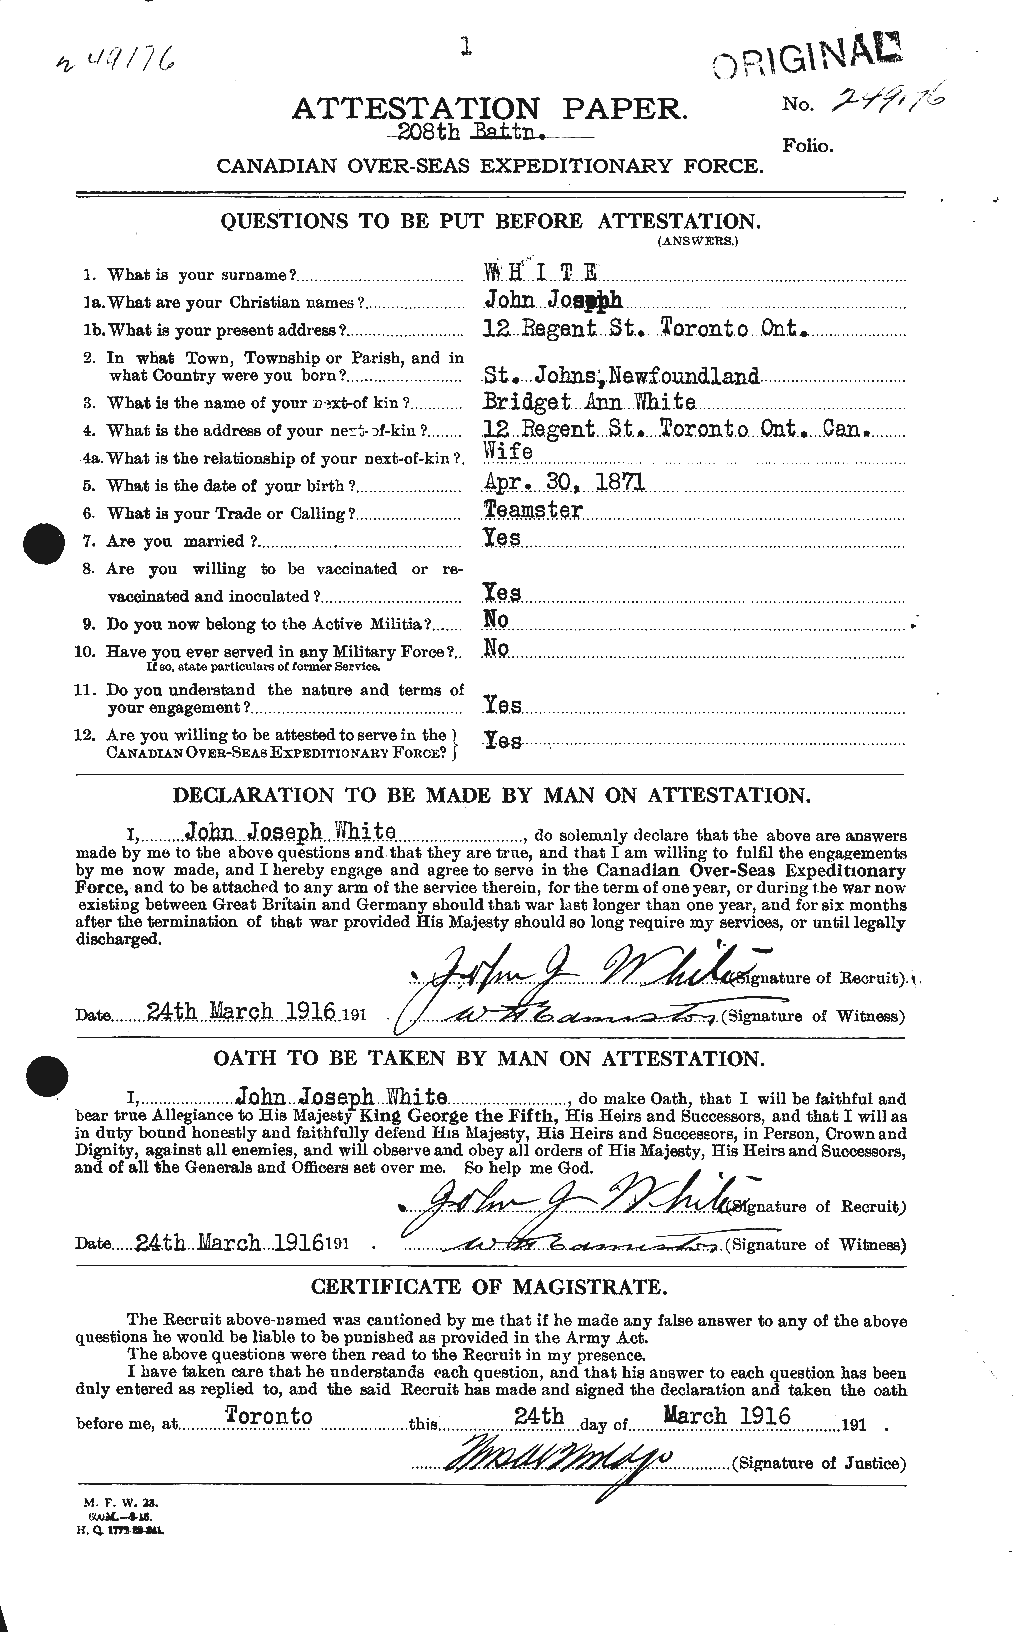 Personnel Records of the First World War - CEF 671578a